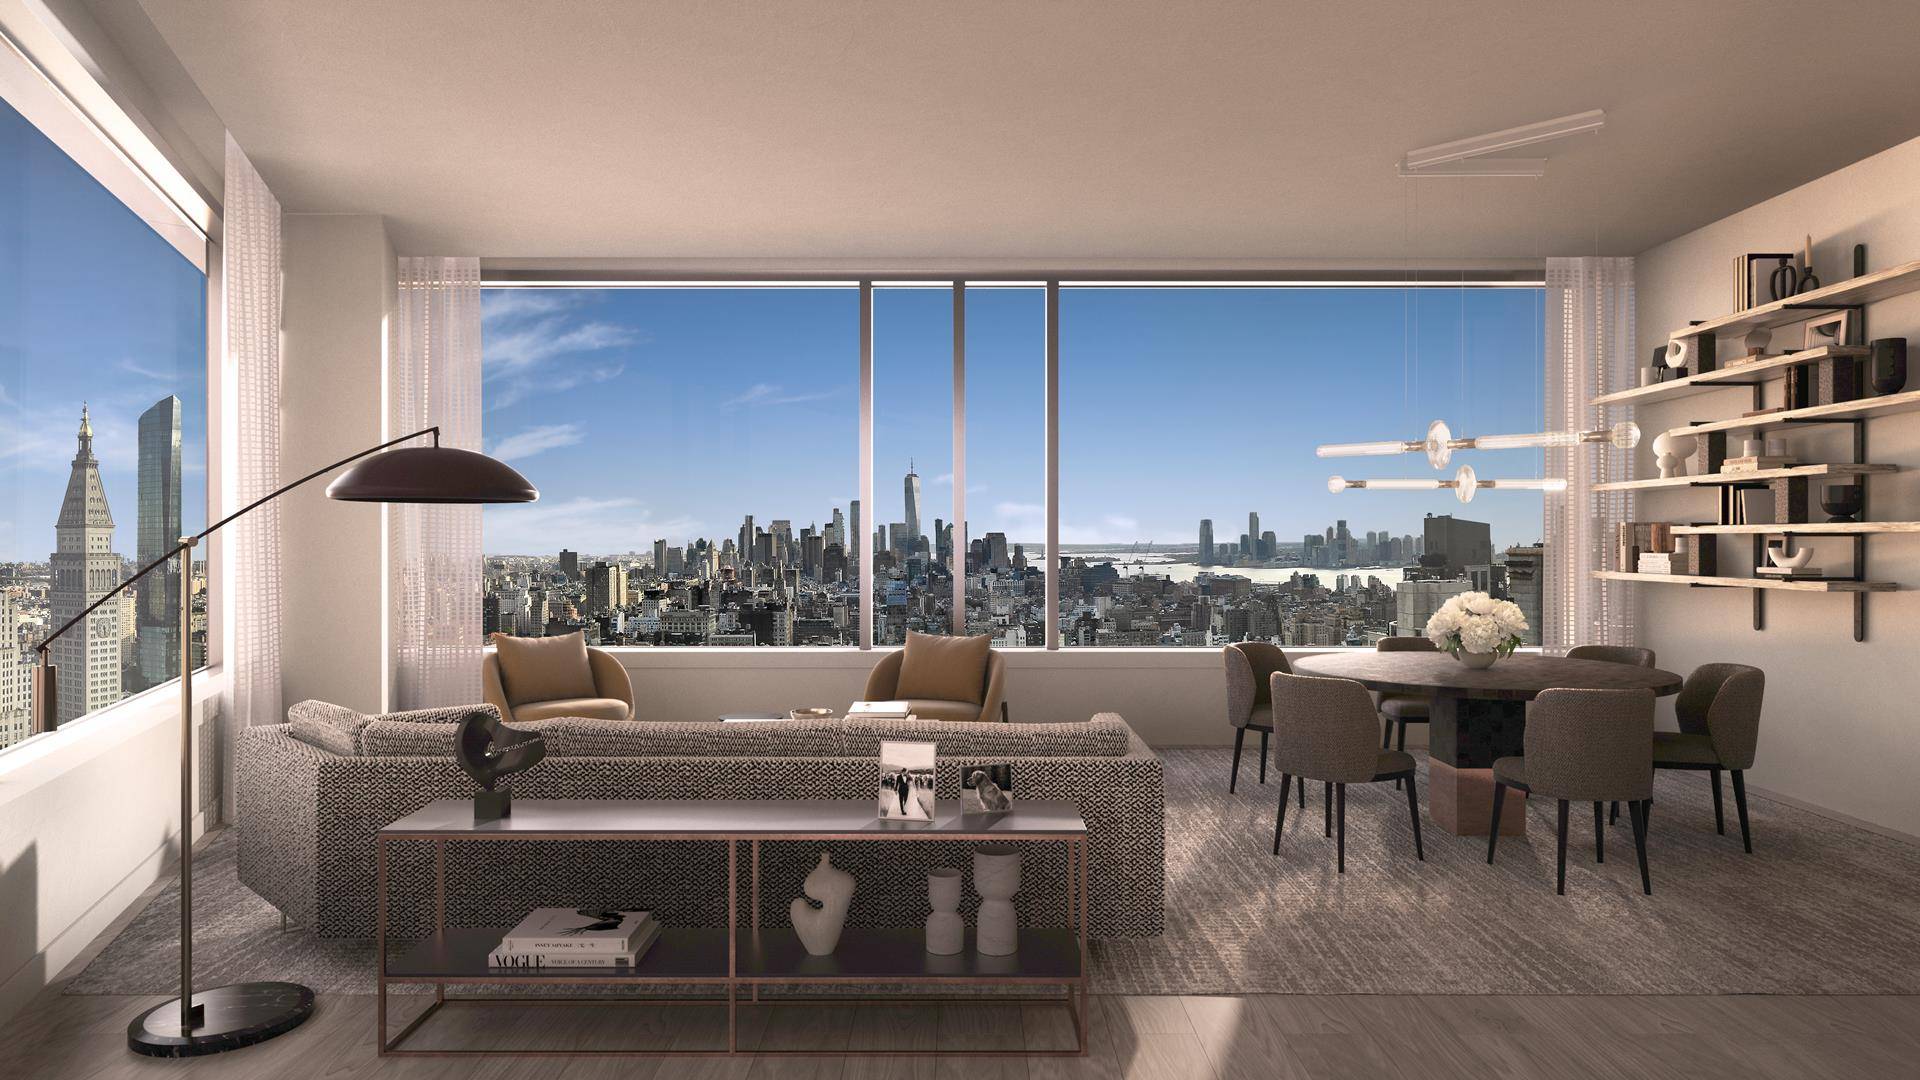 Soaring nearly 500 feet above Manhattan's iconic skyline, and at the very top of the newest tower by internationally acclaimed architect, Rafael Vi oly, PH 42A offers a 2 bedroom, ...